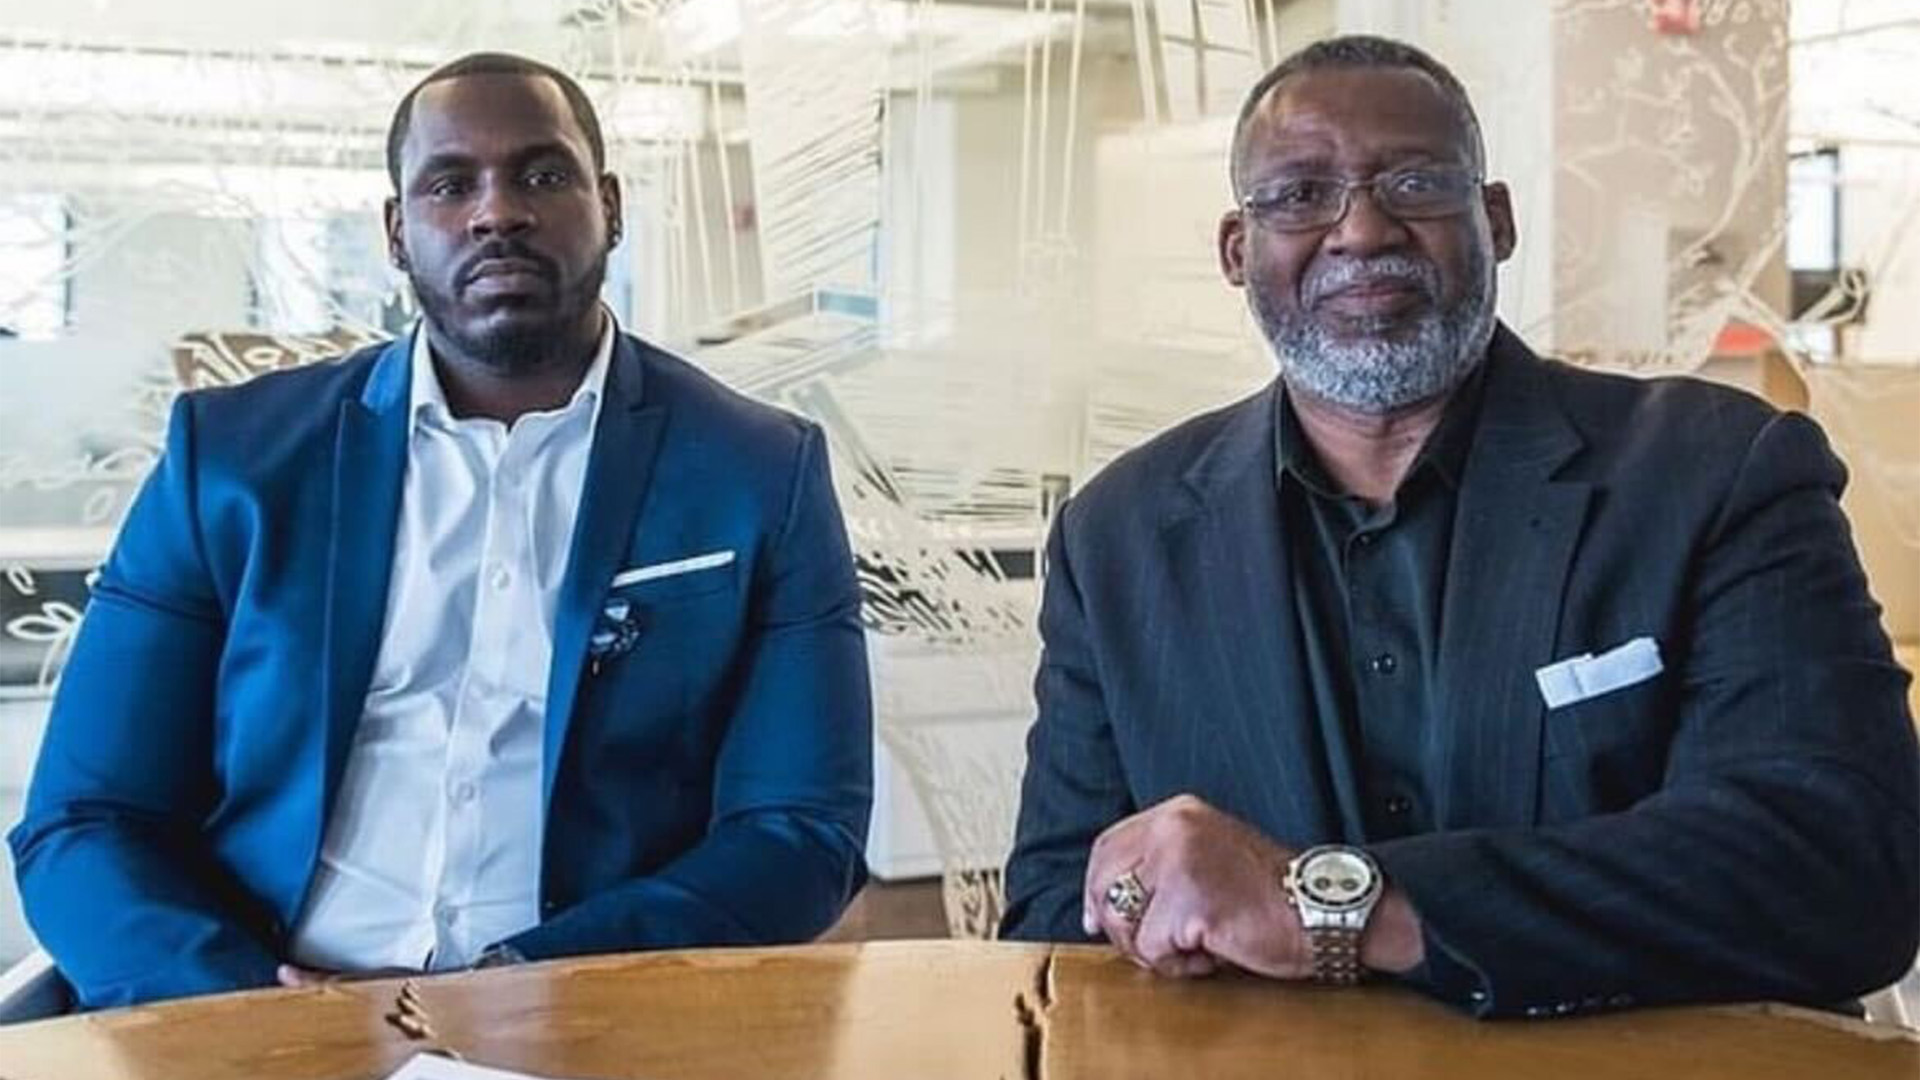 Meet The Father-Son Duo Behind A Multi-Million-Dollar Design Firm That Has Been Fueled By DEI Support